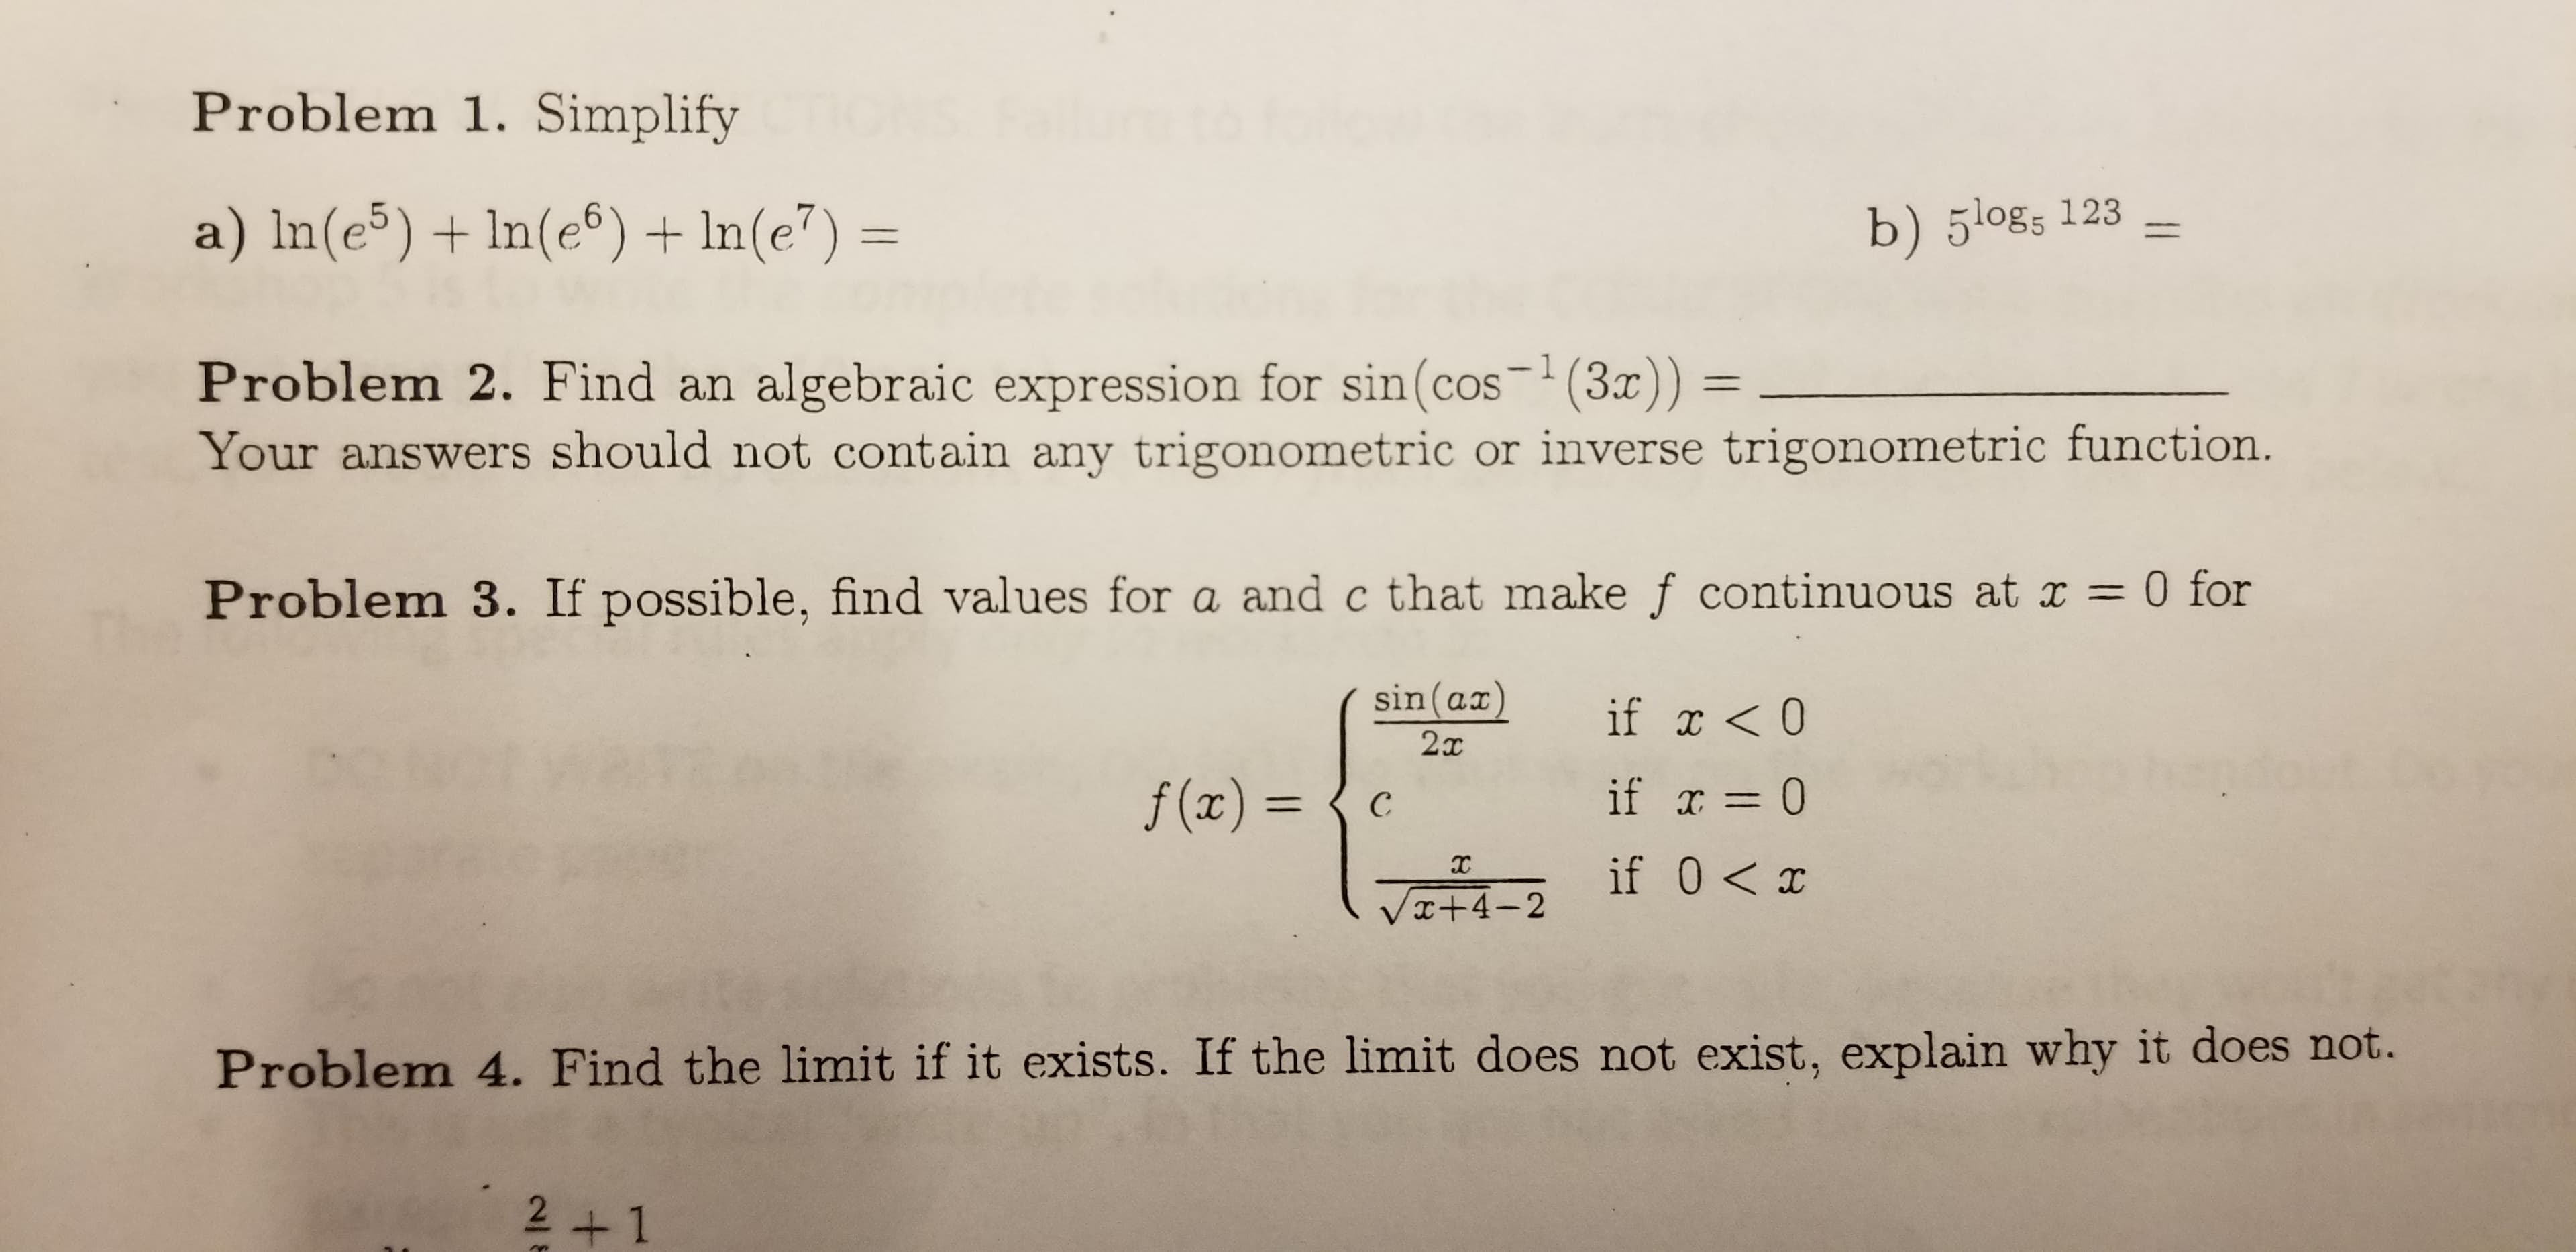 Problem 1. Simplify
a) In(e5) In(e6) In(e7) =
b) 5l0gs 123
algebraic expression for sin(cos (3)) =
Your answers should not contain any trigonometric or inverse trigonometric function.
- 1
Problem 2. Find an
0 for
Problem 3. If possible, find values for a and c that make f continuous at r
1
sin (ax)
if x<0
2т
if 0
f(x) =
с
if 0 x
VI+4-2
Problem 4. Find the limit if it exists. If the limit does not exist, explain why it does not.
2+1
